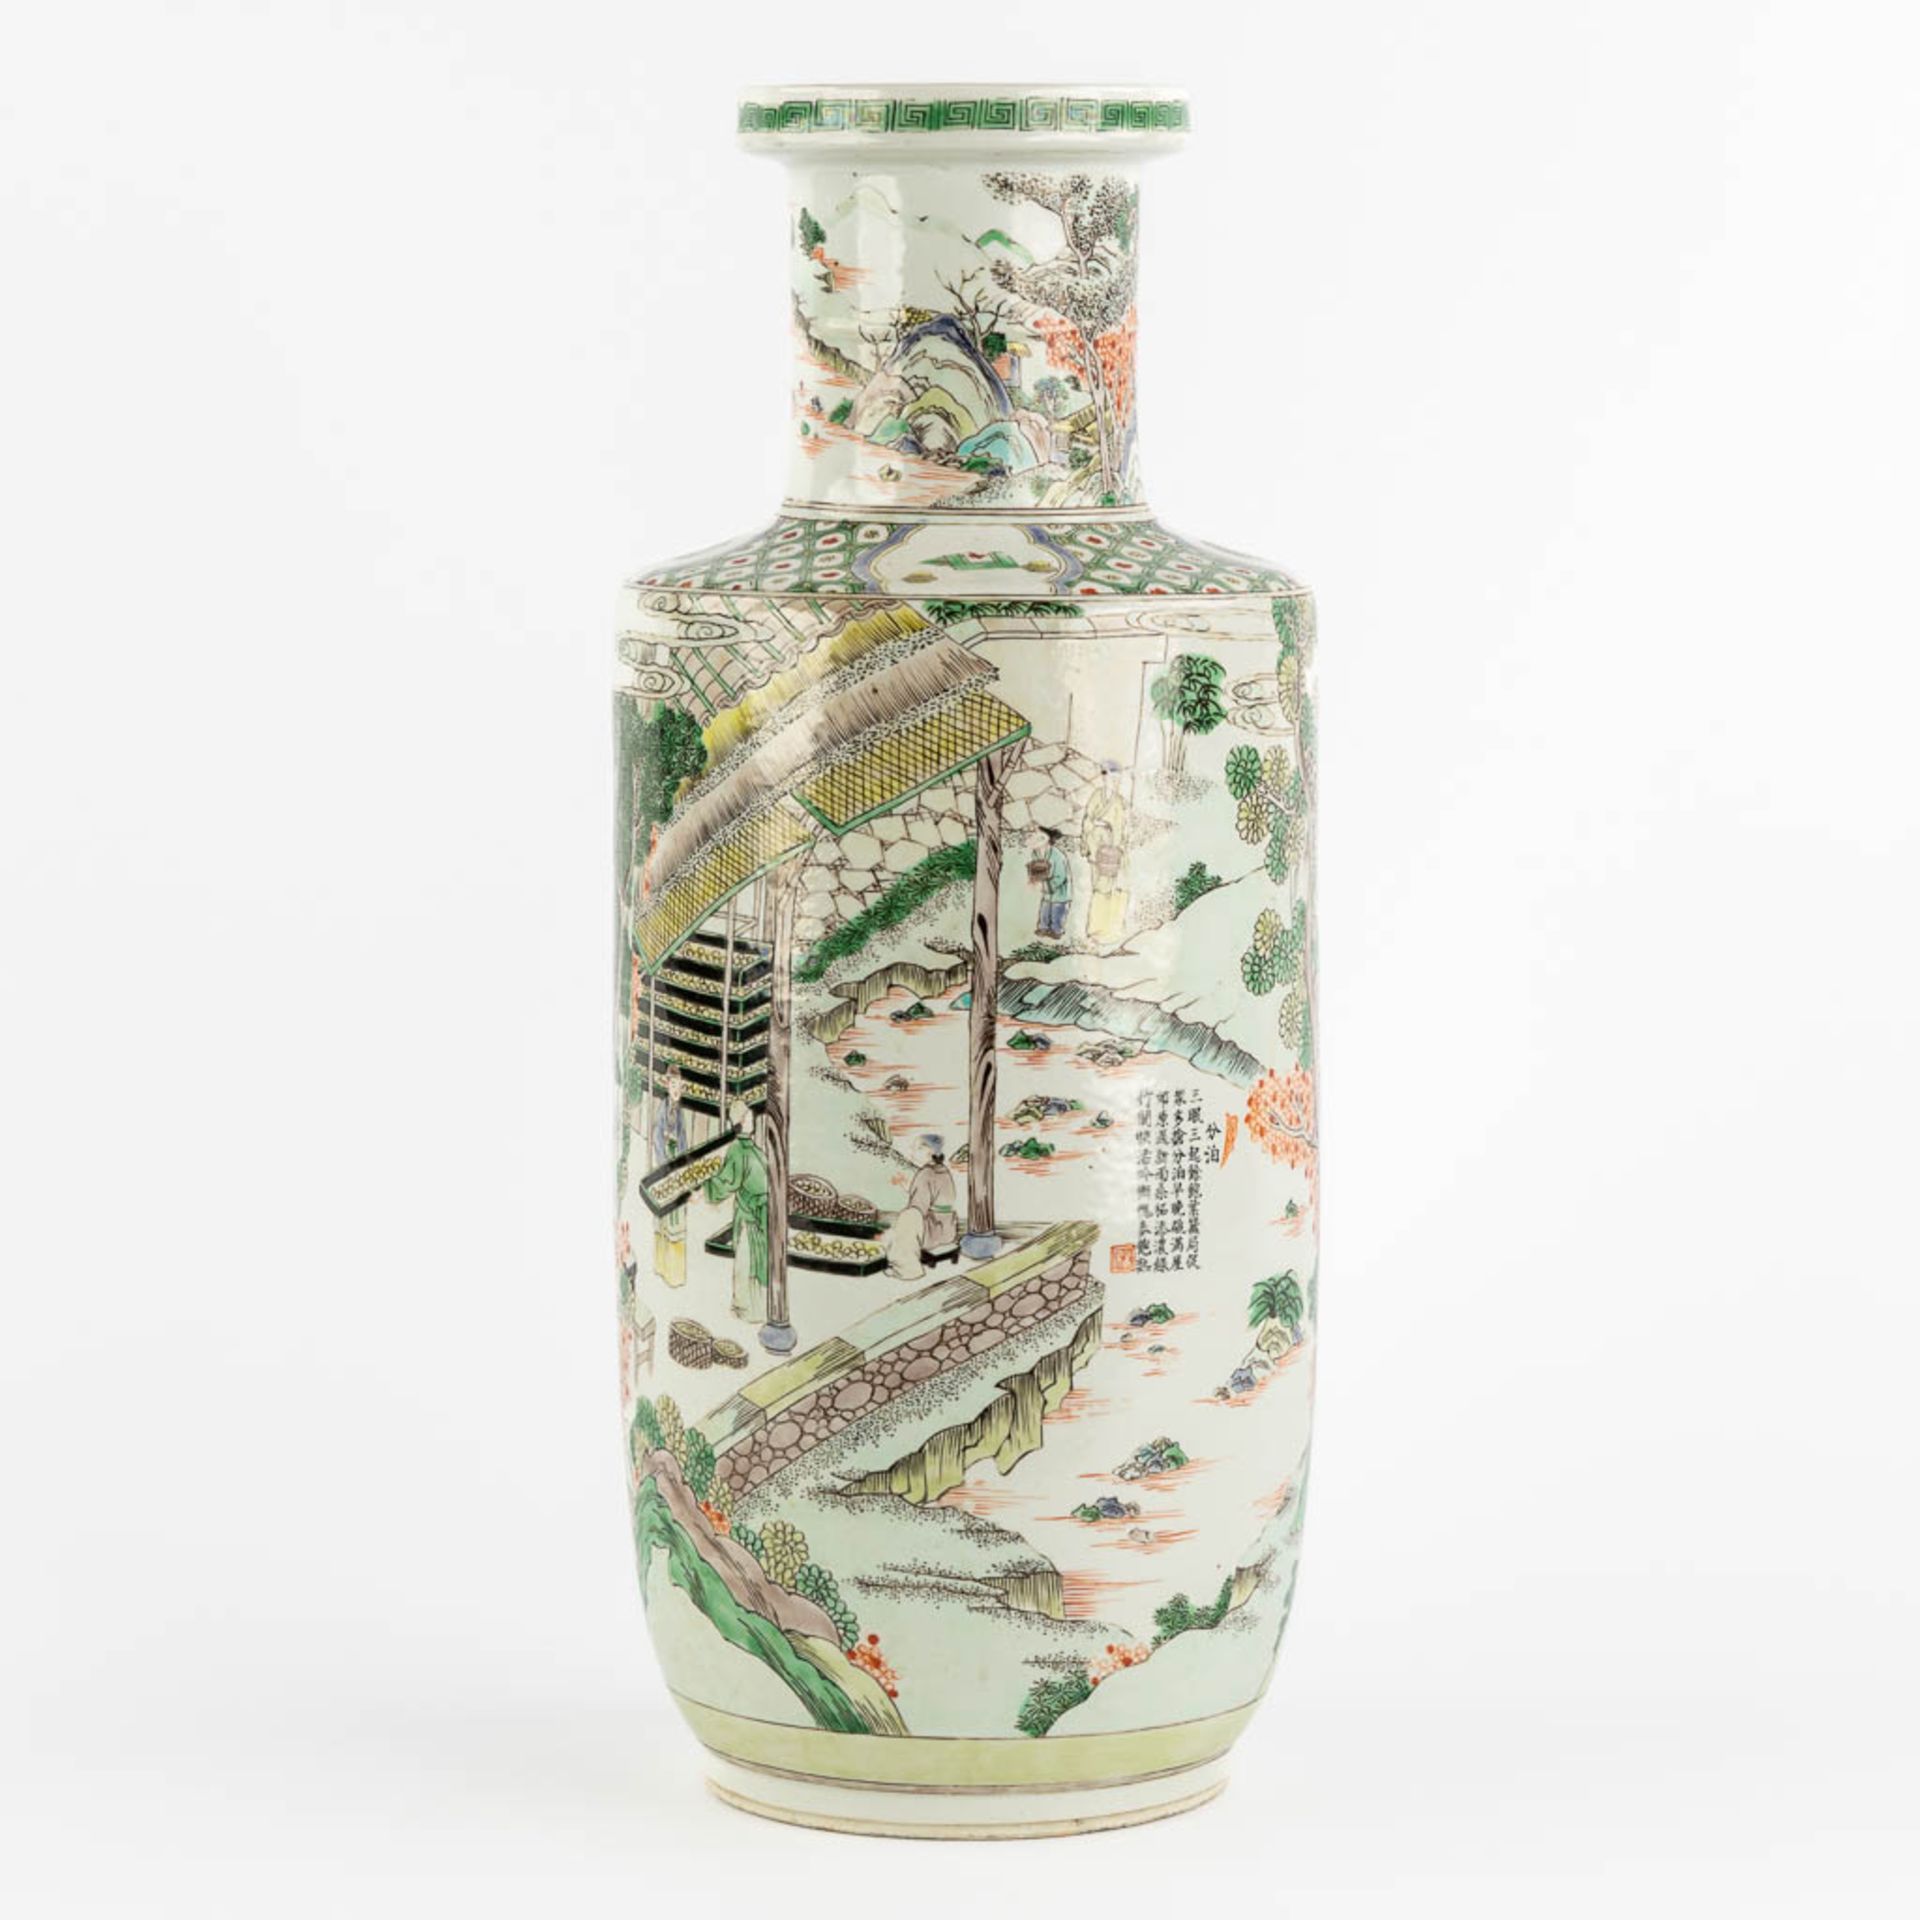 A Chinese Famille Verte 'Roulleau' vase with scènes of rice production. (H:46 x D:18 cm) - Image 5 of 13